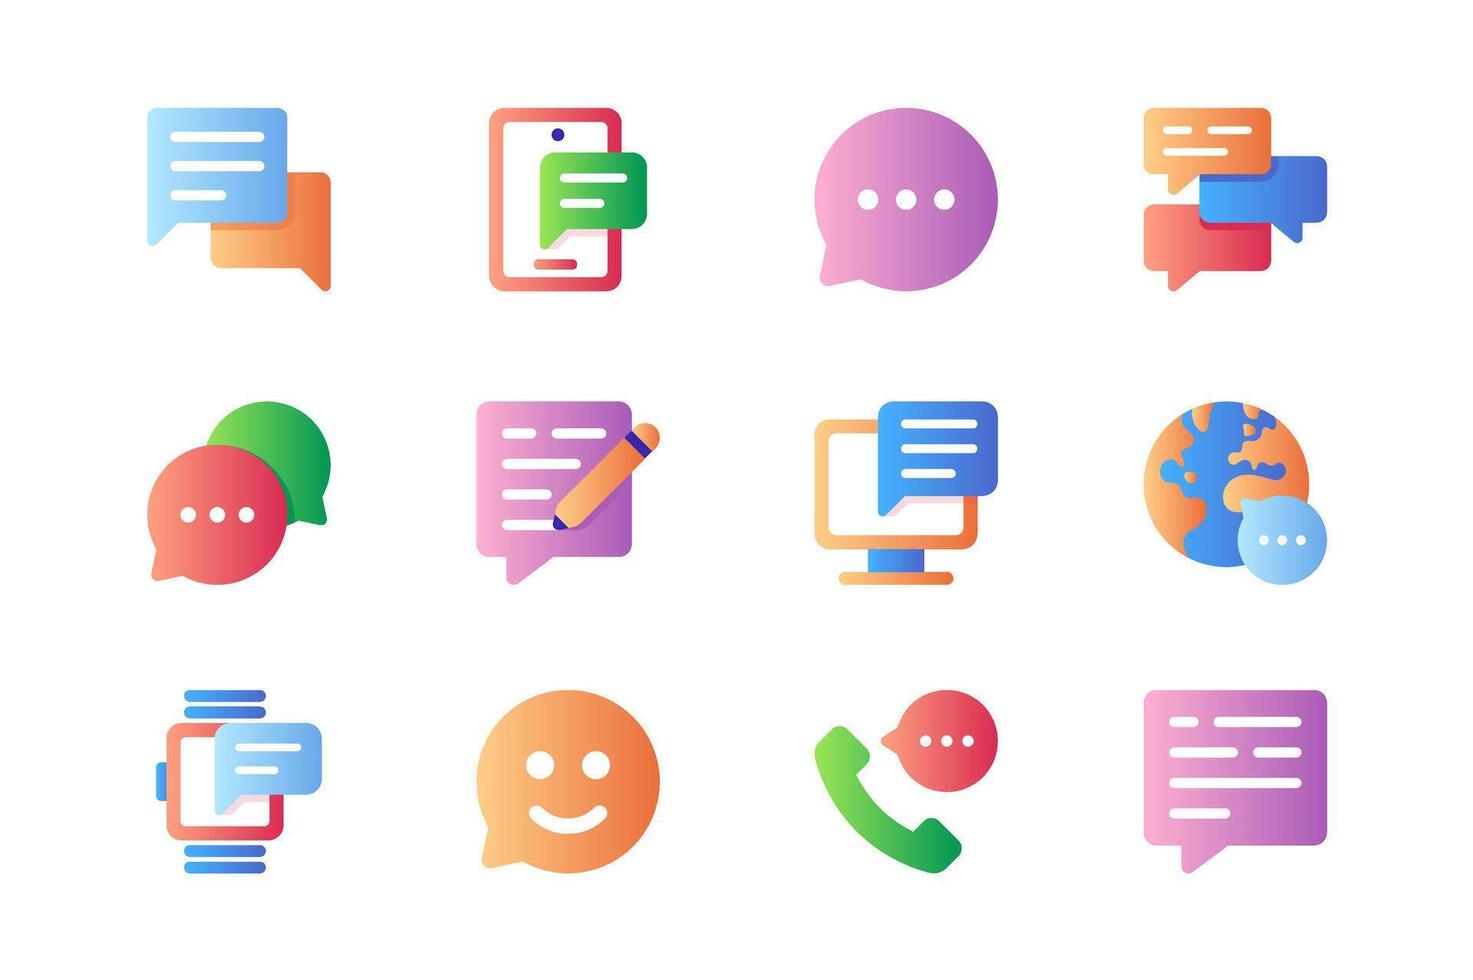 Communication icons set in color flat design. Pack of message, chat bubble, phone call, computer, globe, emoticon, business mail, information and other. Vector pictograms for web sites and mobile app